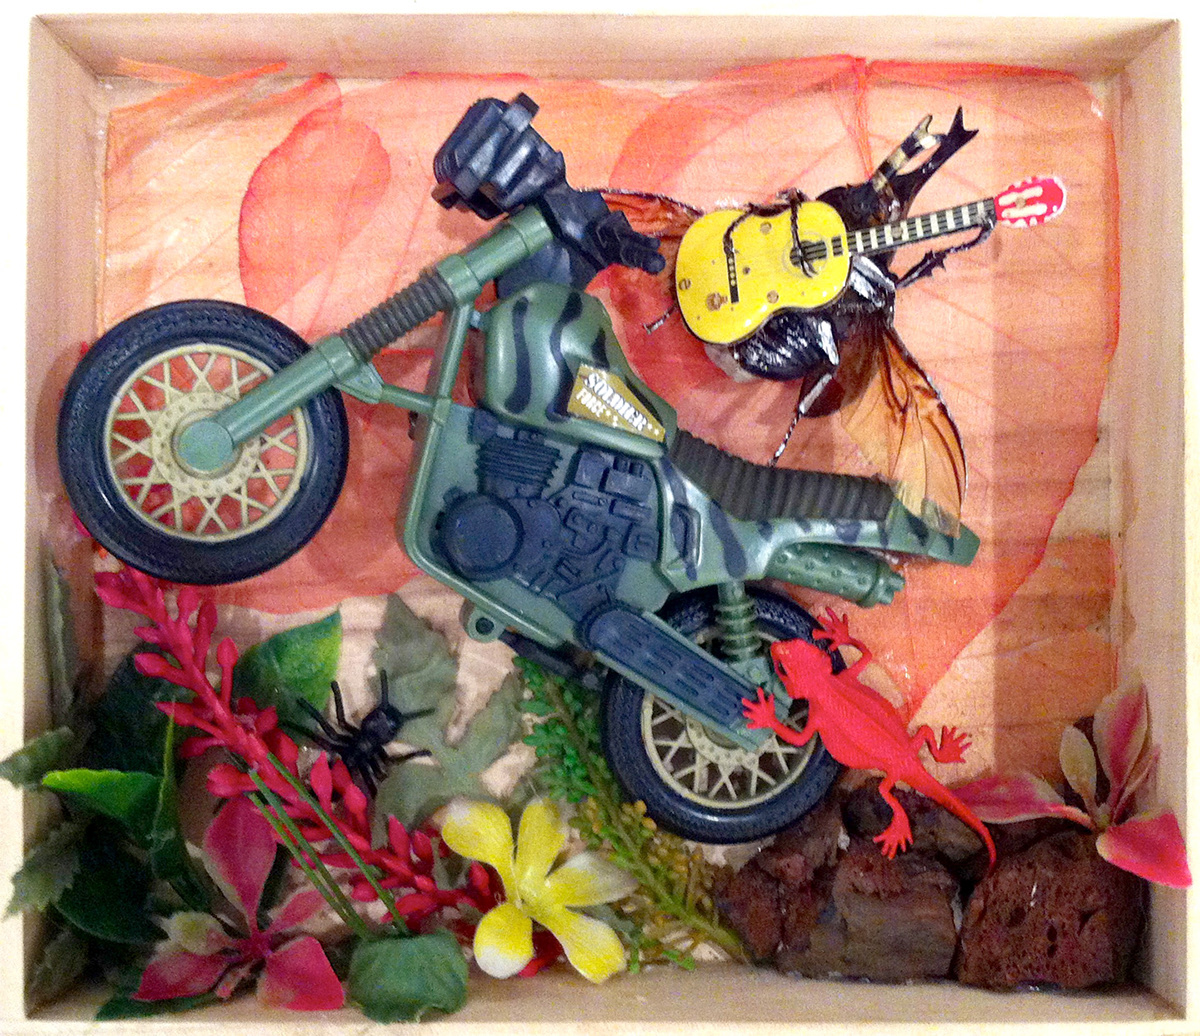 beetles  insects  shadowbox rock  narrative  found objects  sculpture  3d  stop motion